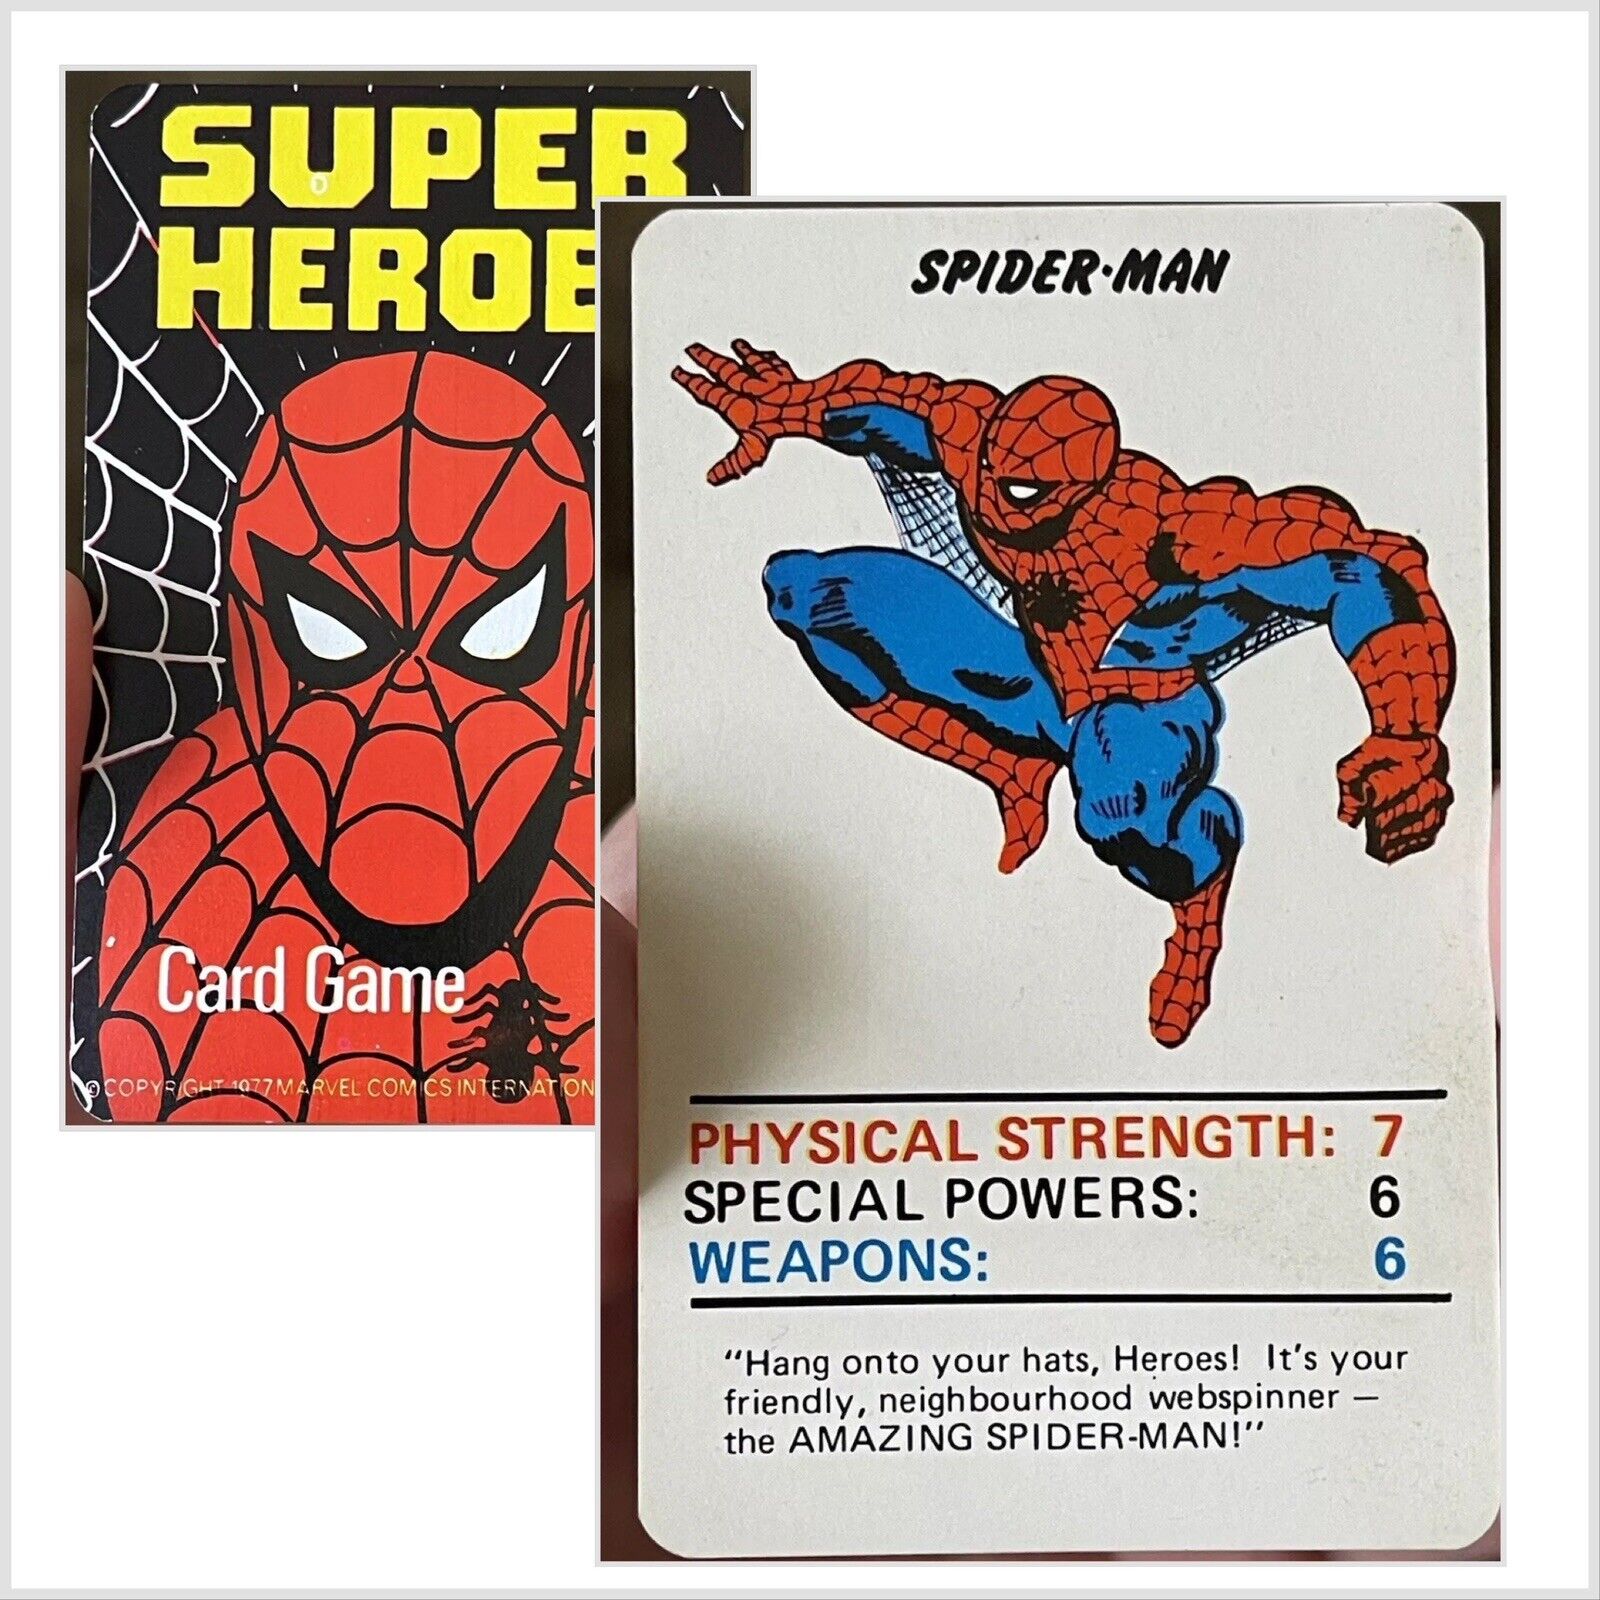 EXTREMELY RARE VINTAGE 1977 MARVEL SUPERHEROES SPIDERMAN TOP TRUMPS CARD GAME